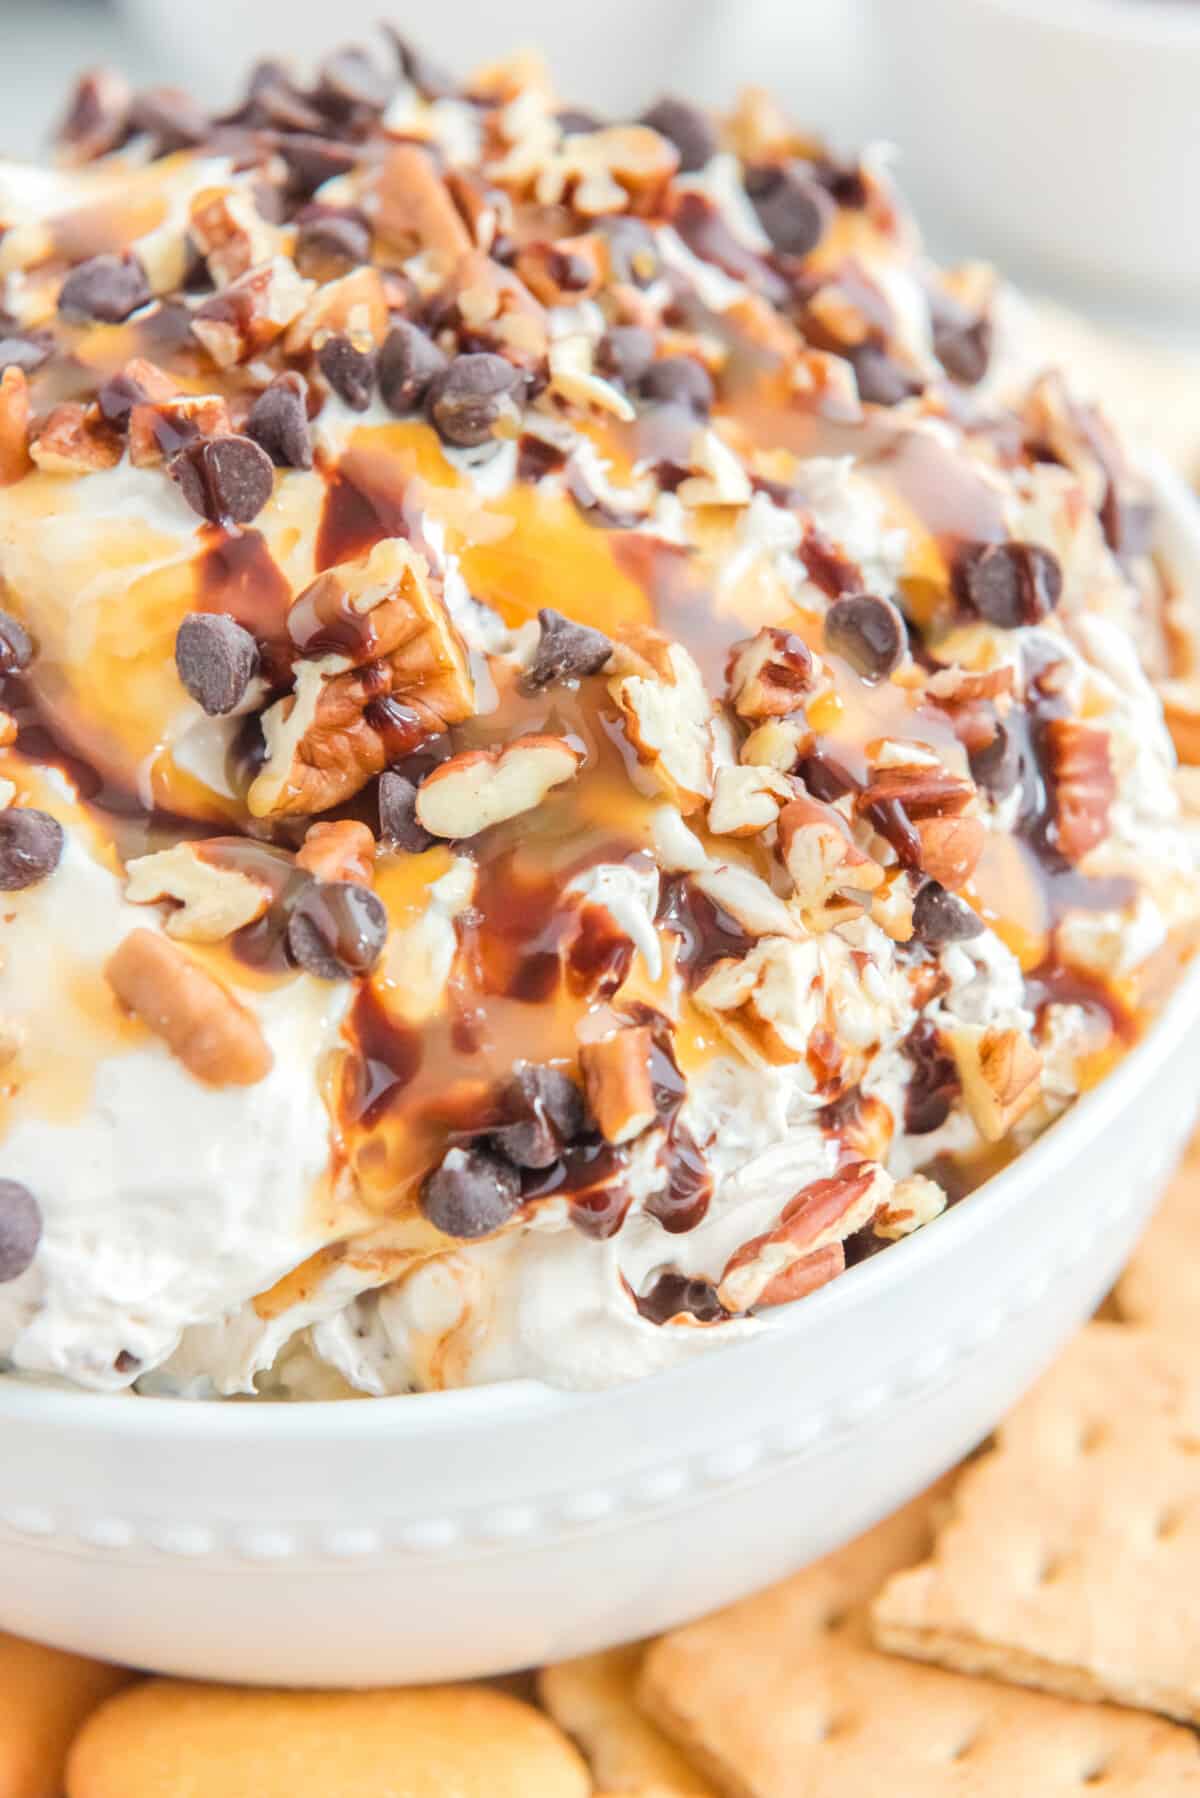 No bake turtle cheesecake dip garnished with caramel, chocolate chips, and pecans.